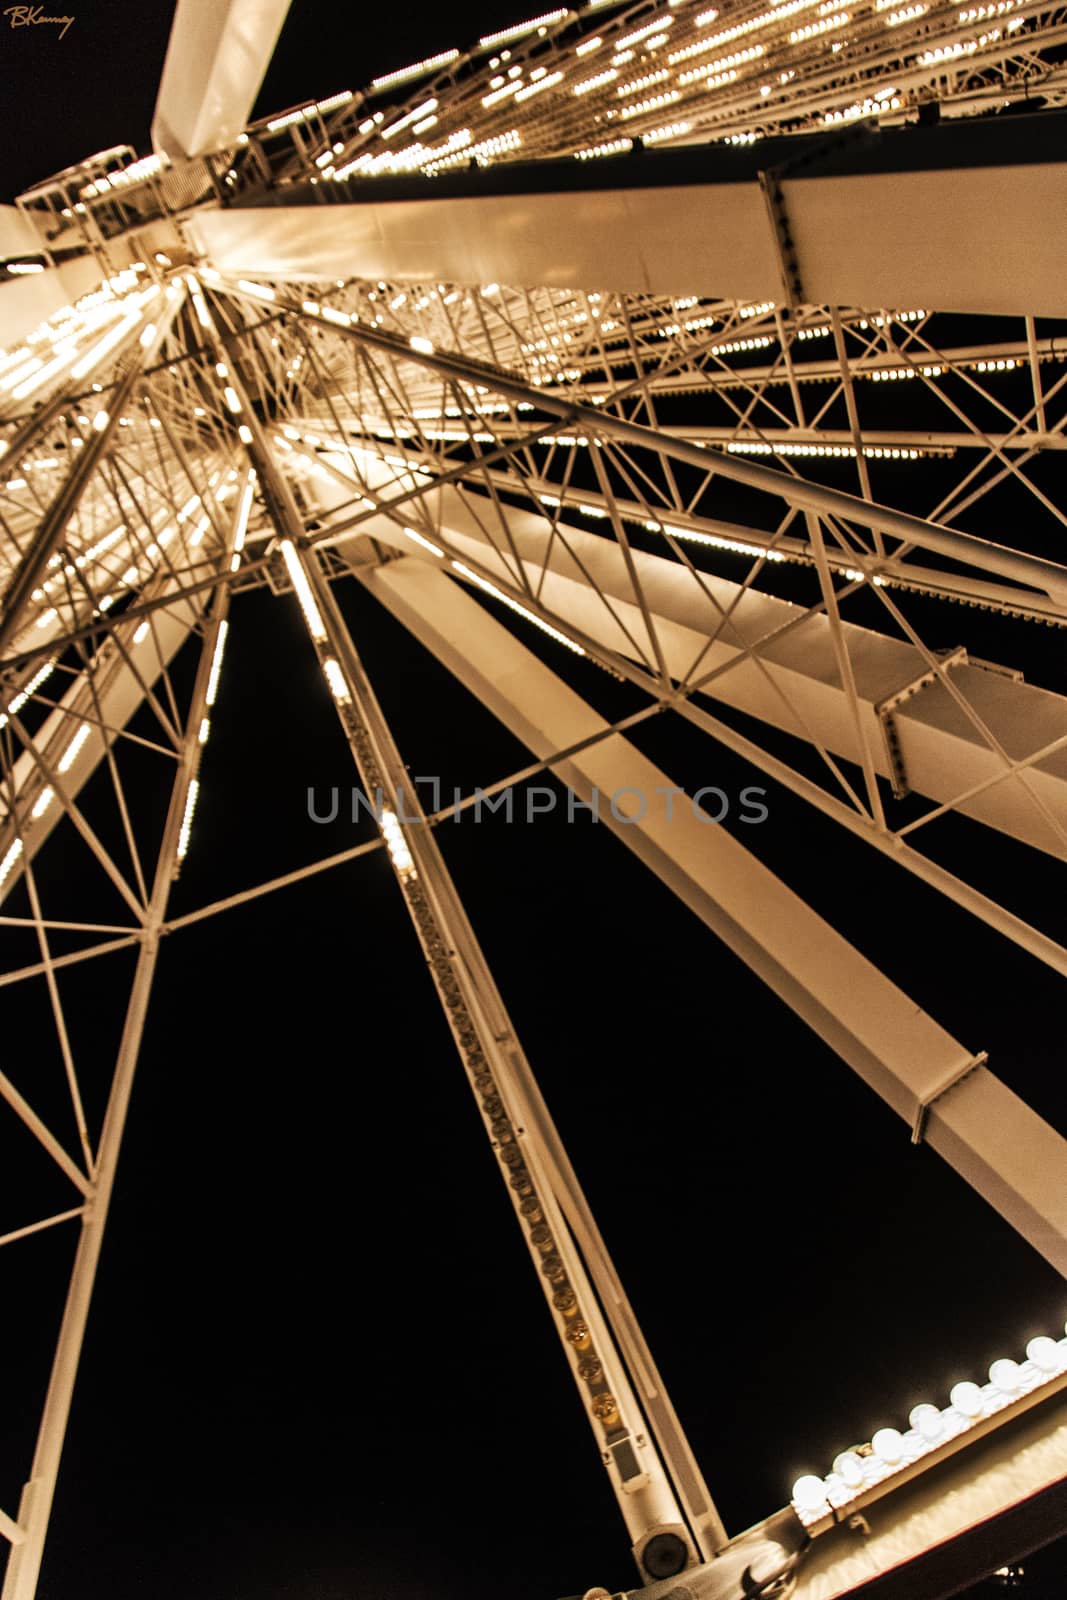 A Ferris wheel at night time.